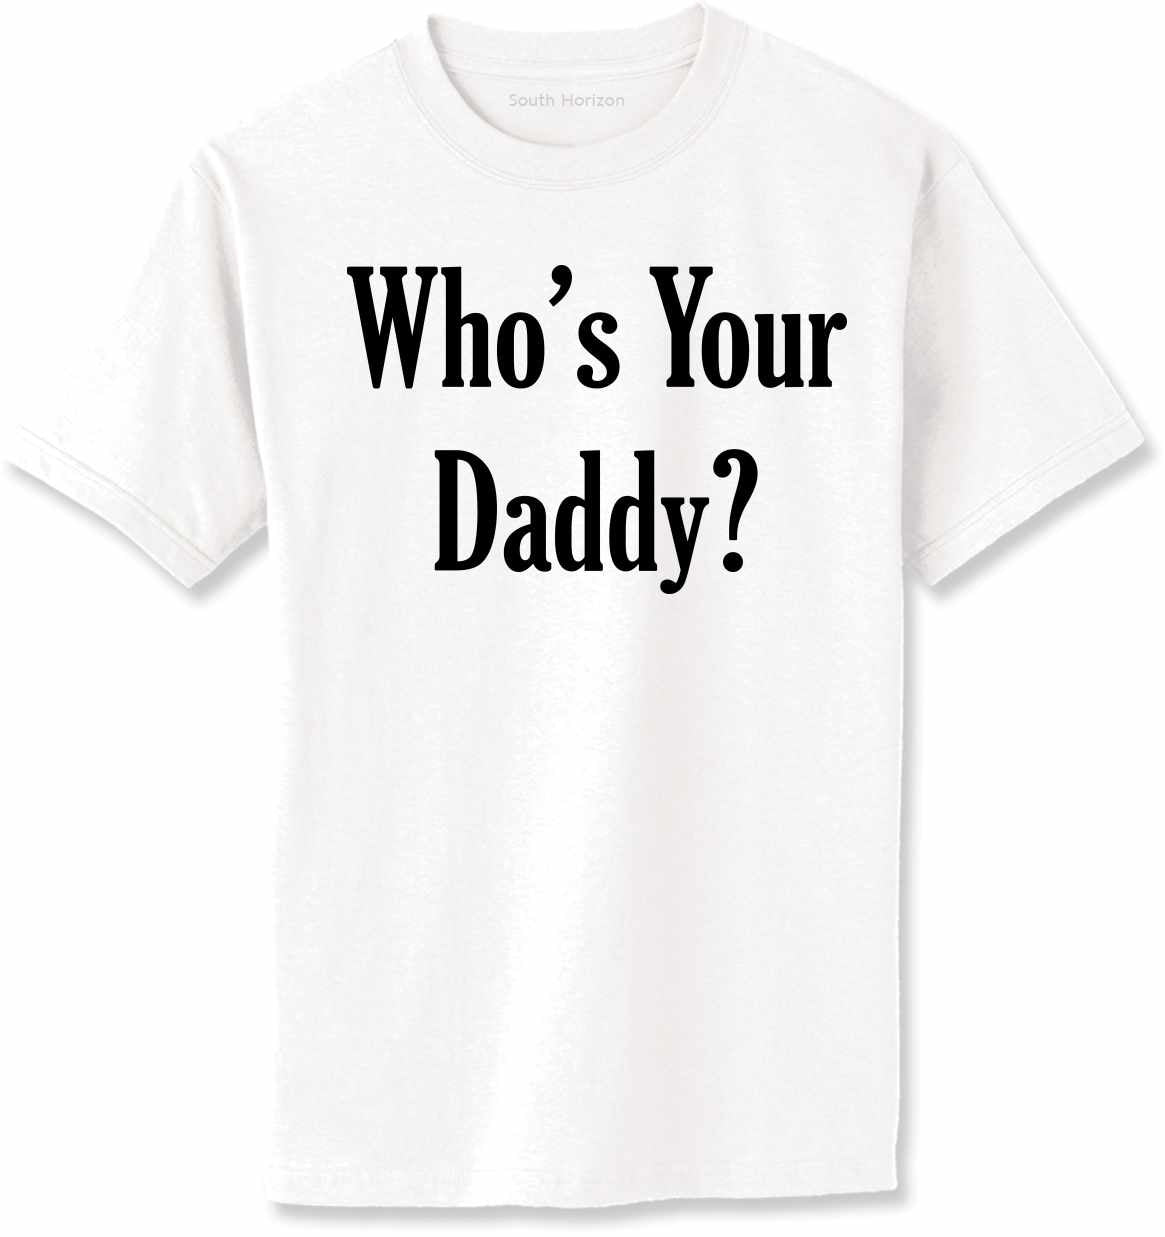 Who's Your Daddy Adult T-Shirt (#584-1)